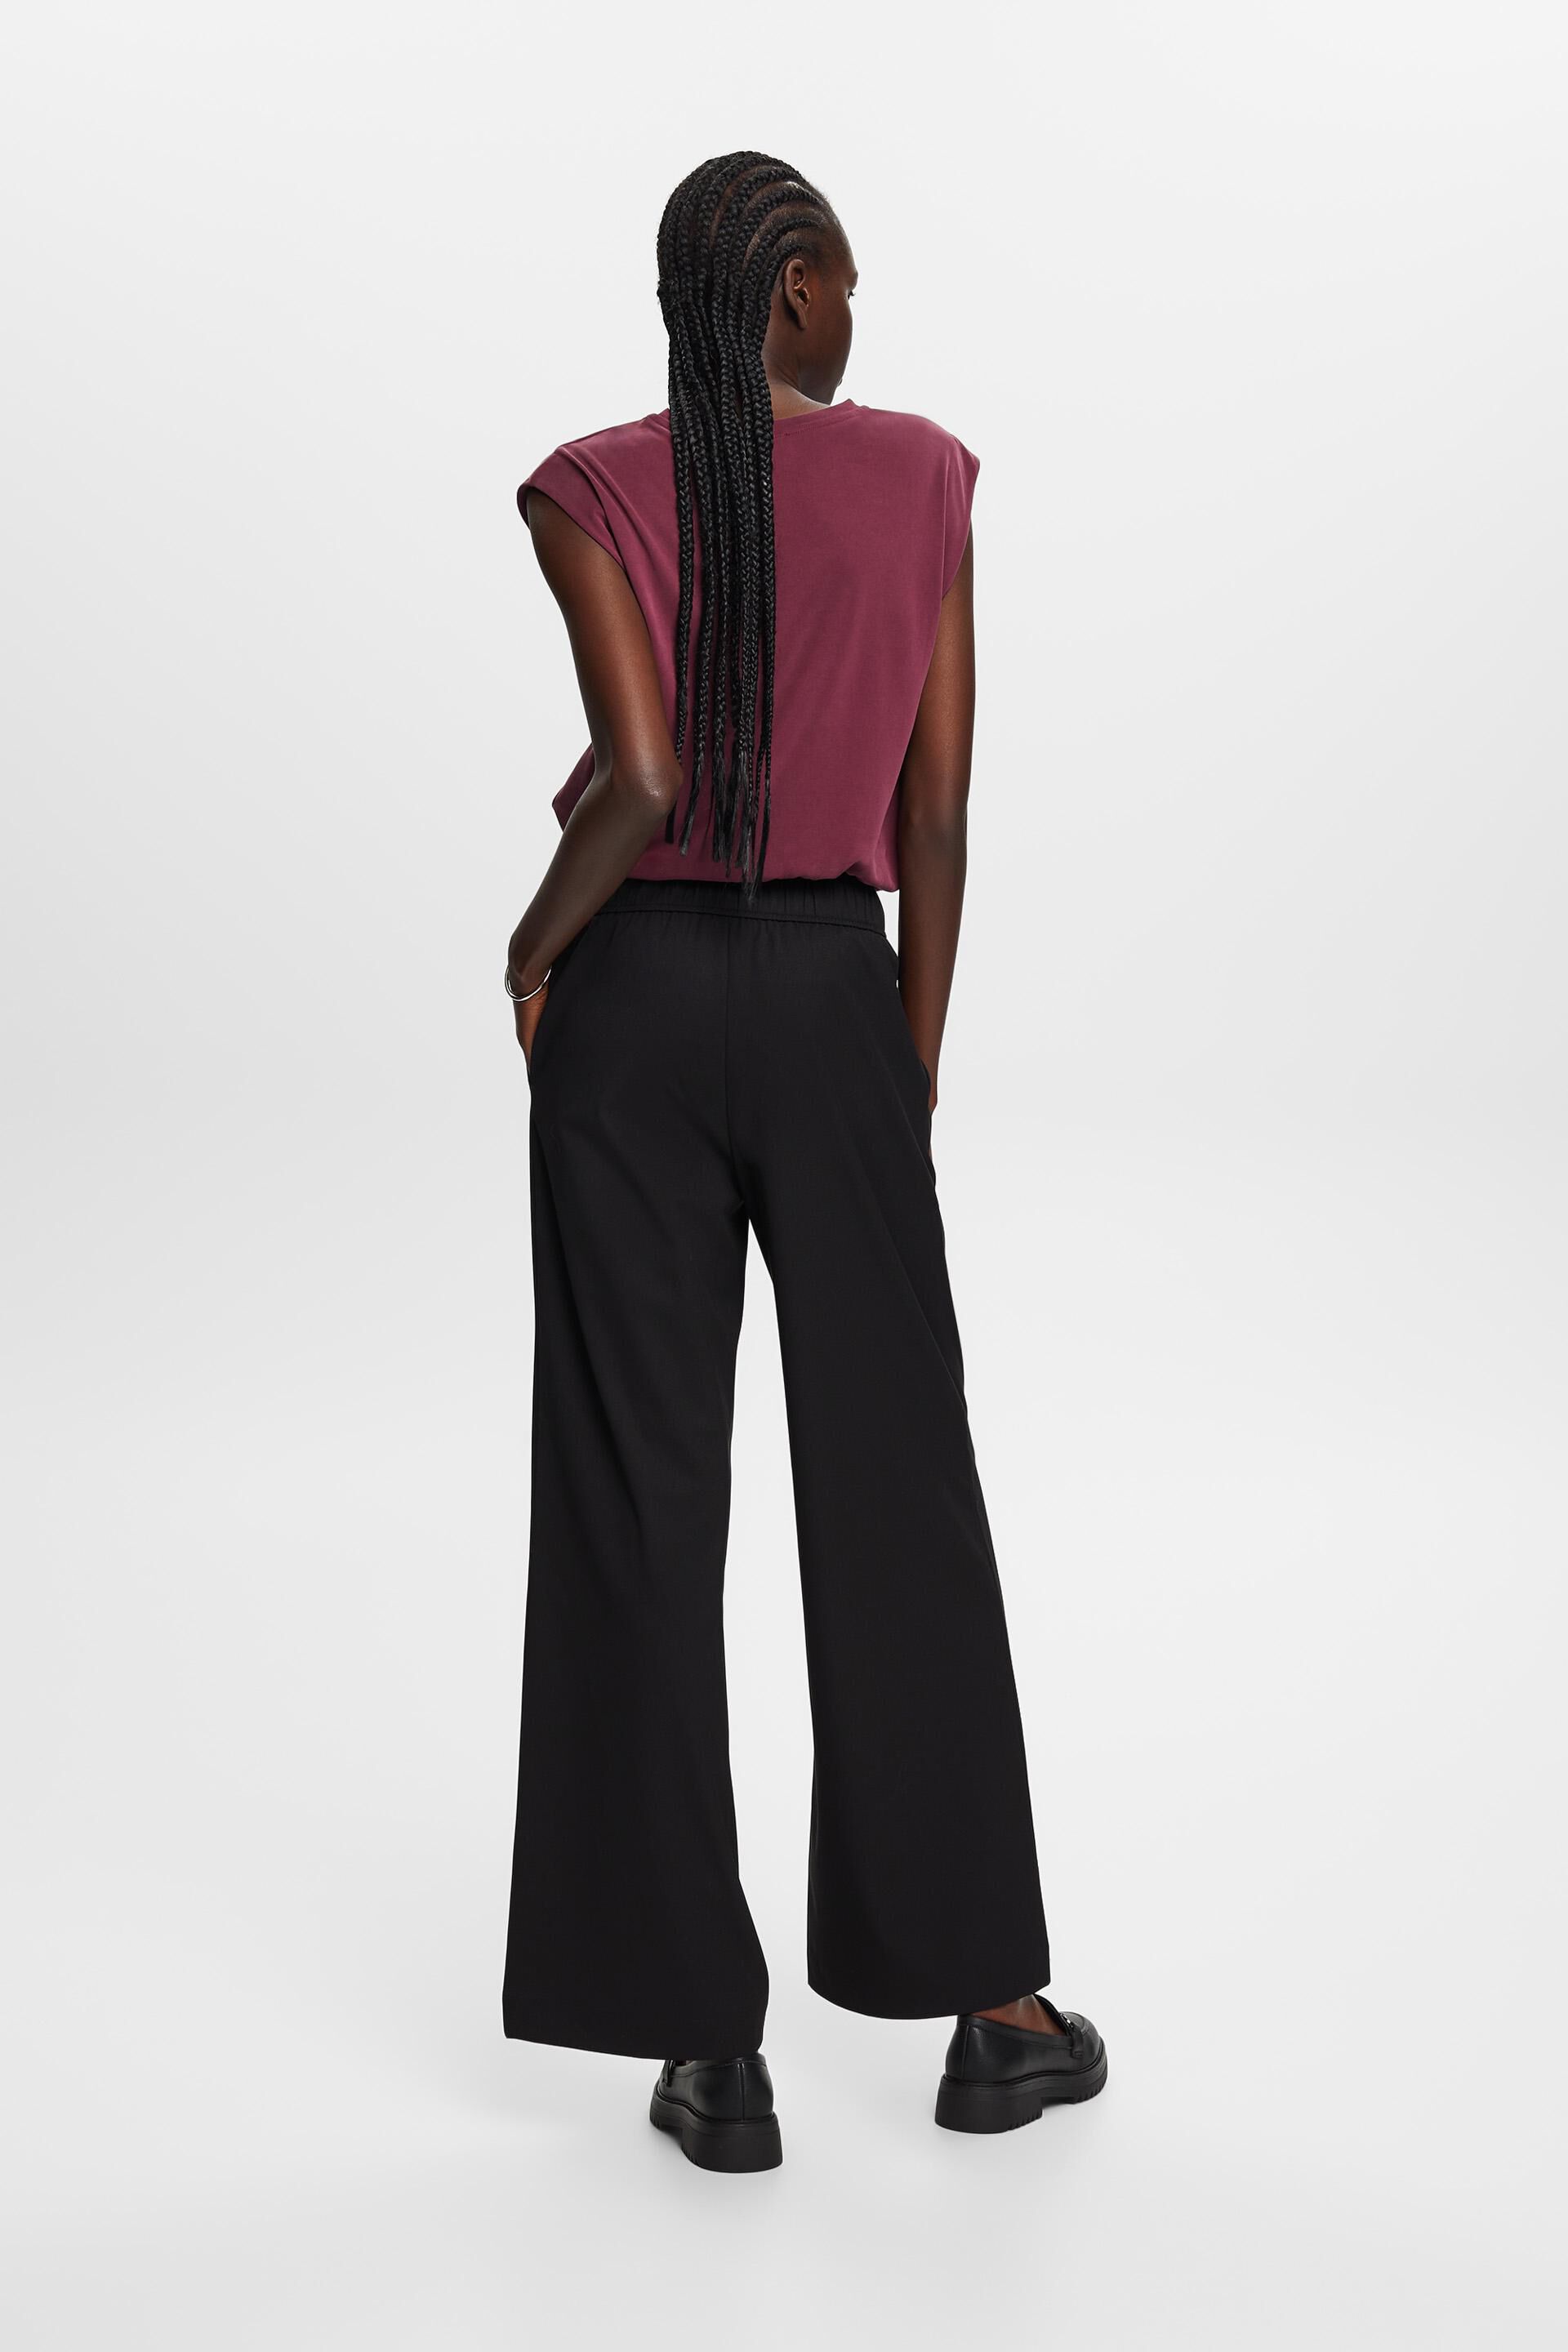 I.nco Black Stretch Jersey Pull On Trousers with Side Embellishment -  Runway Boutique